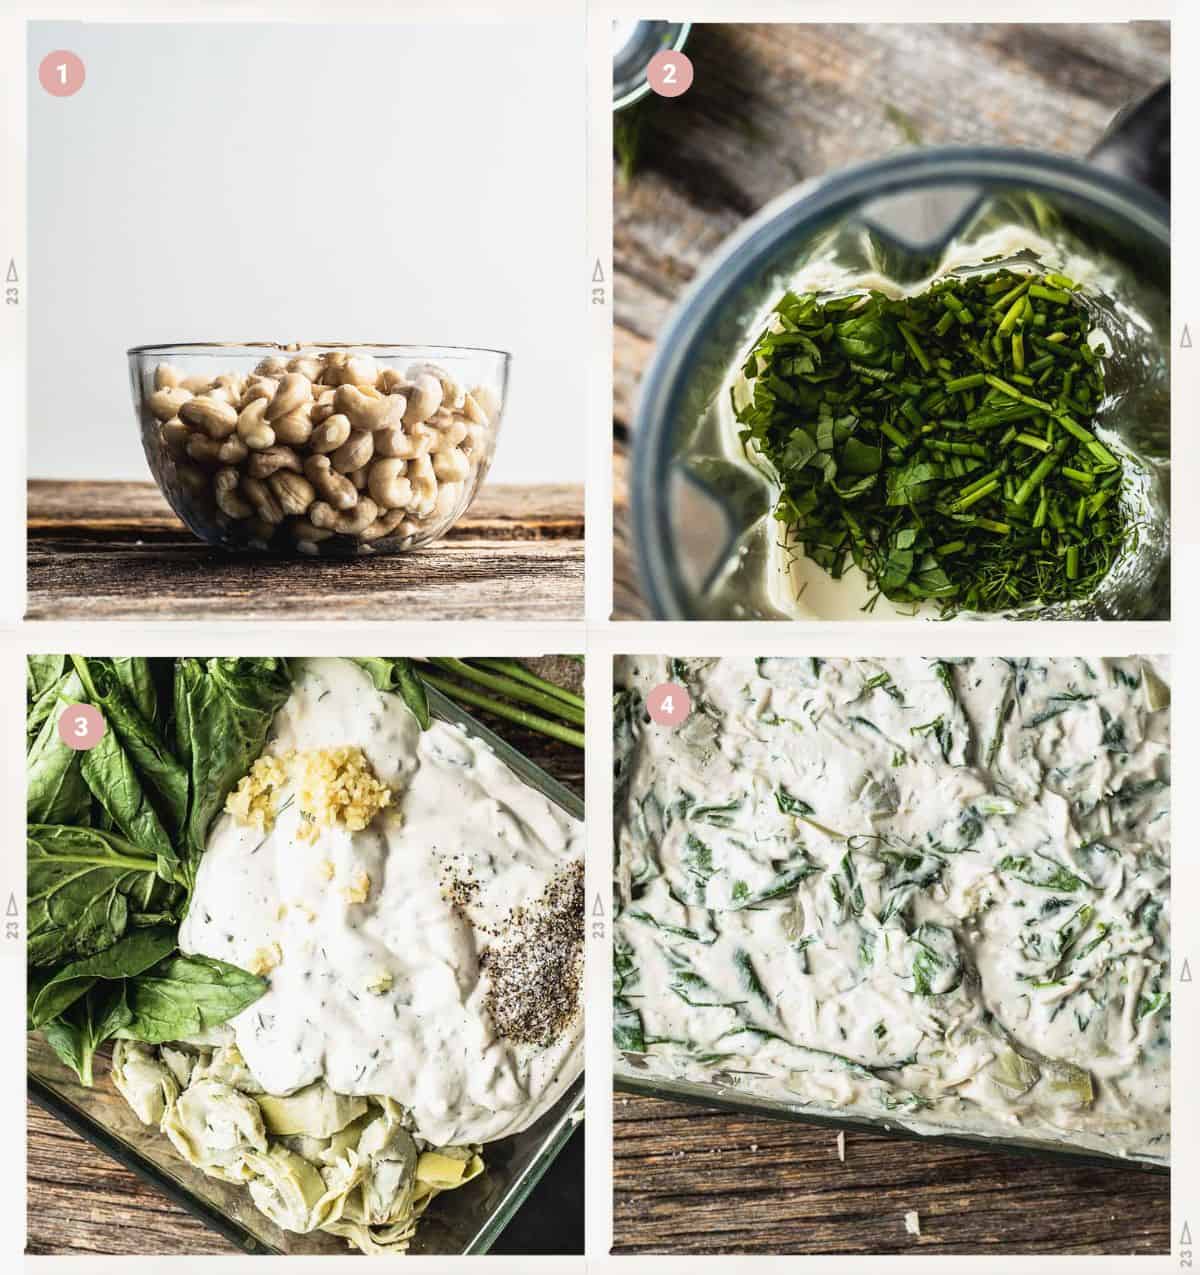 Four-photo montage showing how to make dairy-free vegan spinach artichoke dip step by step.